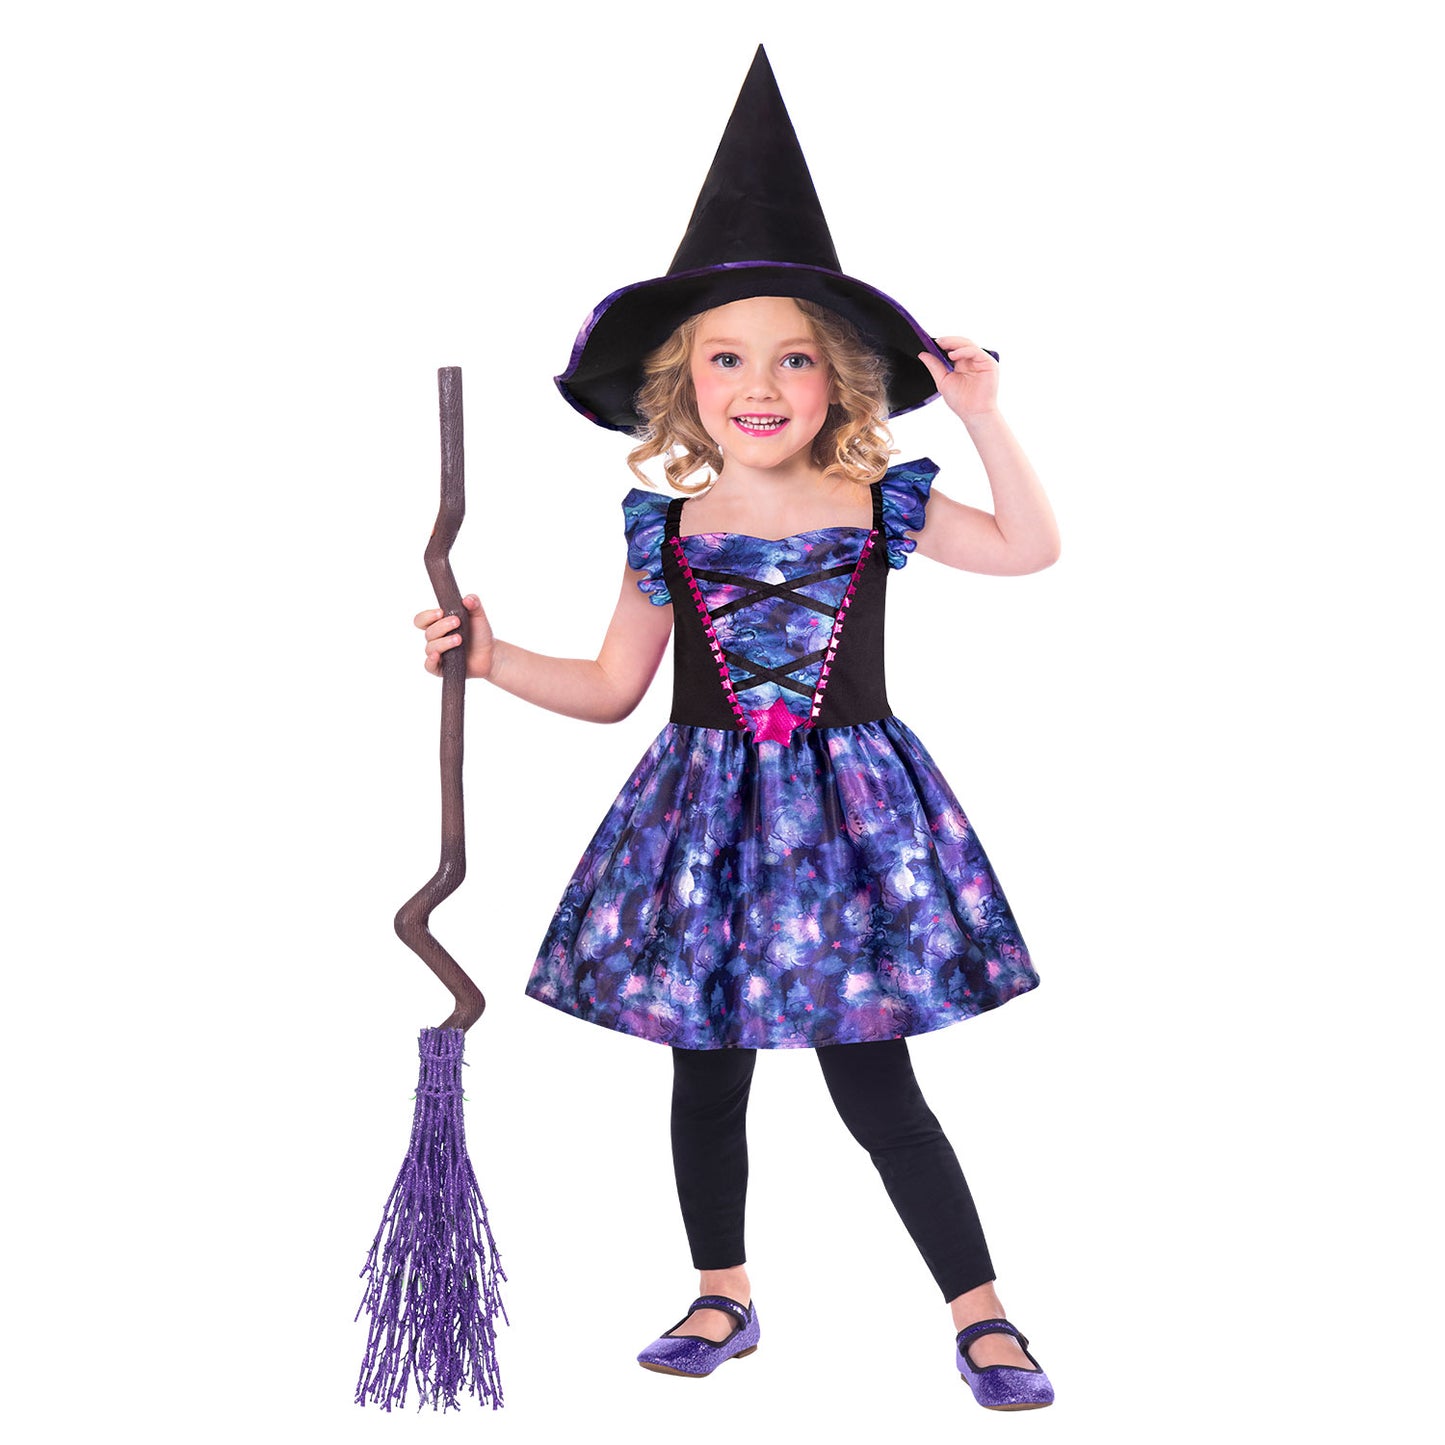 Mythical Witch Sustainable Costume, Age 6-8 years